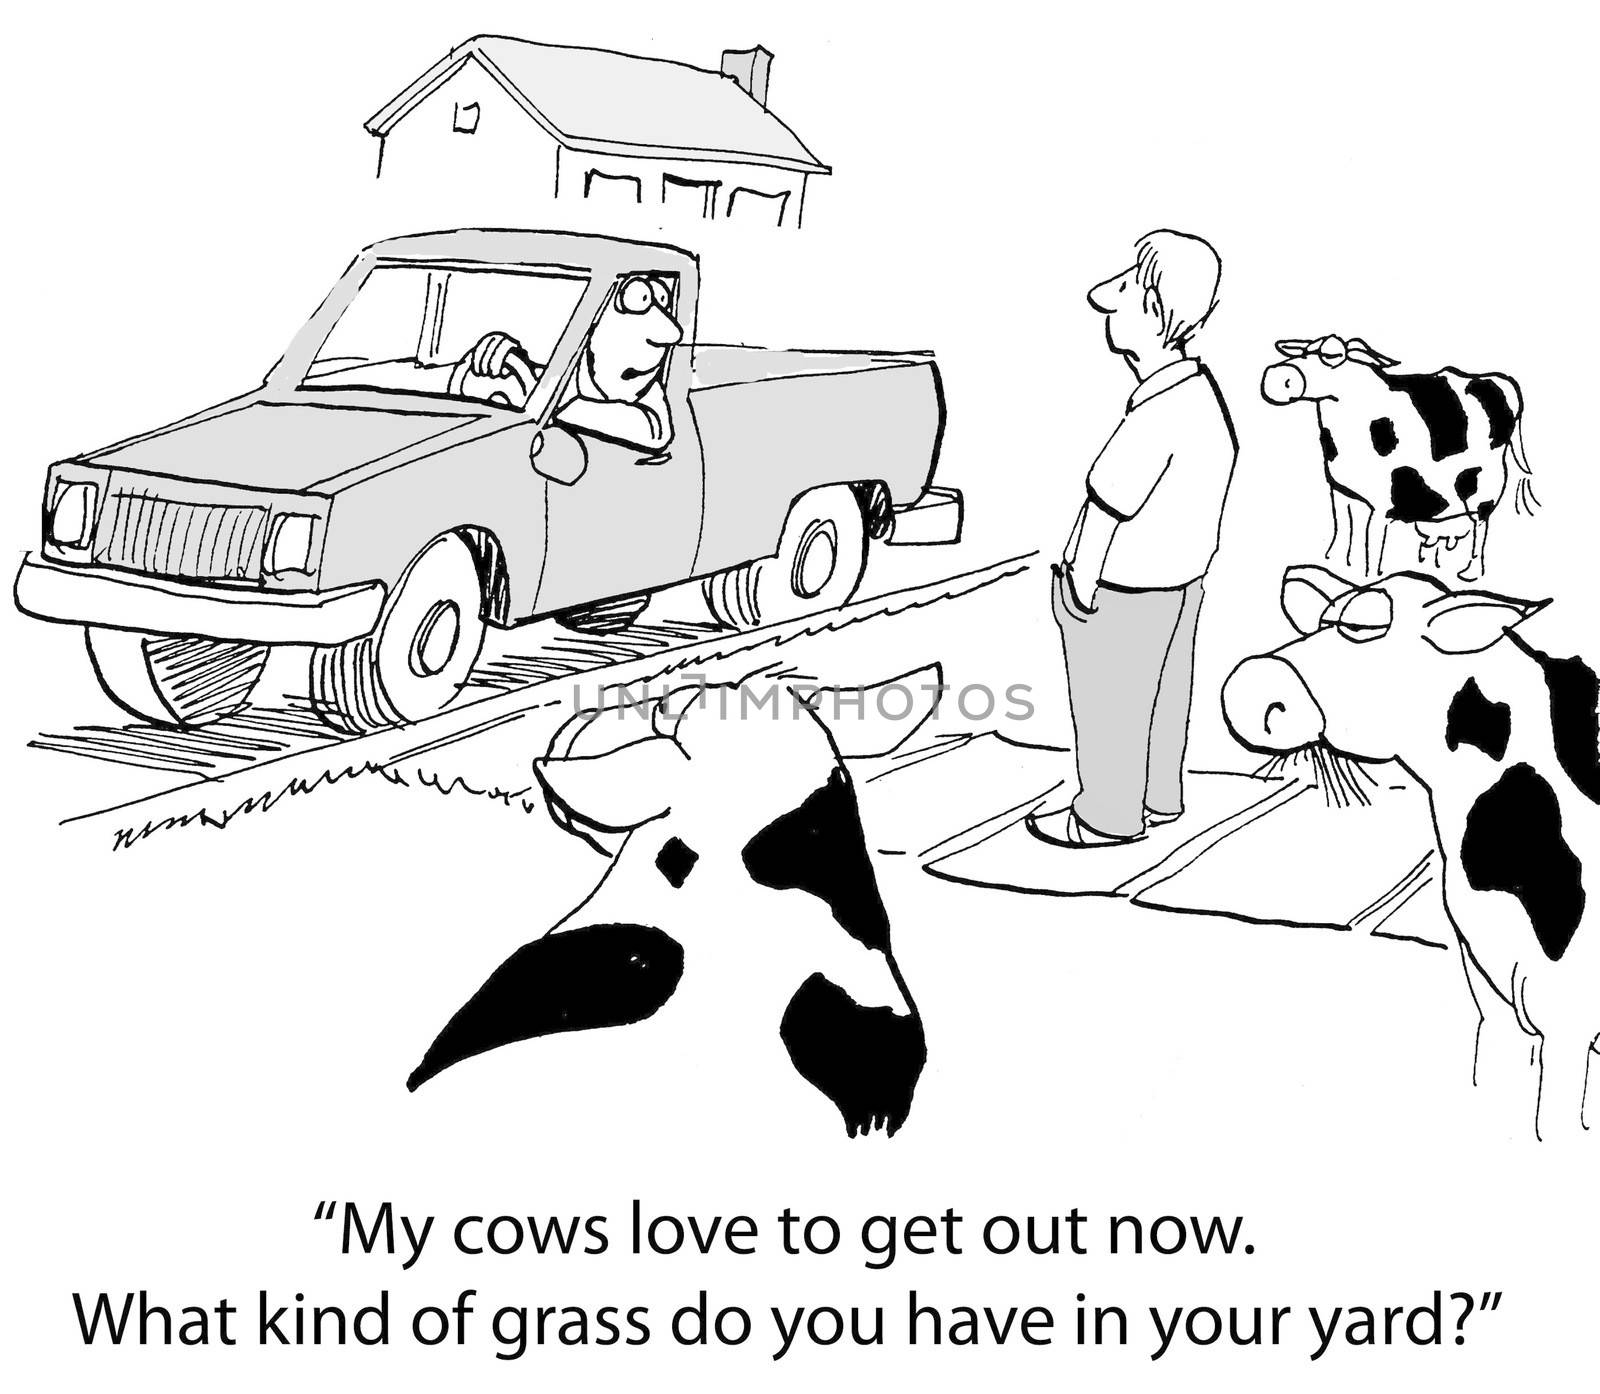 "My cows love to get out now. What kind of grass do you have in your yard?"
